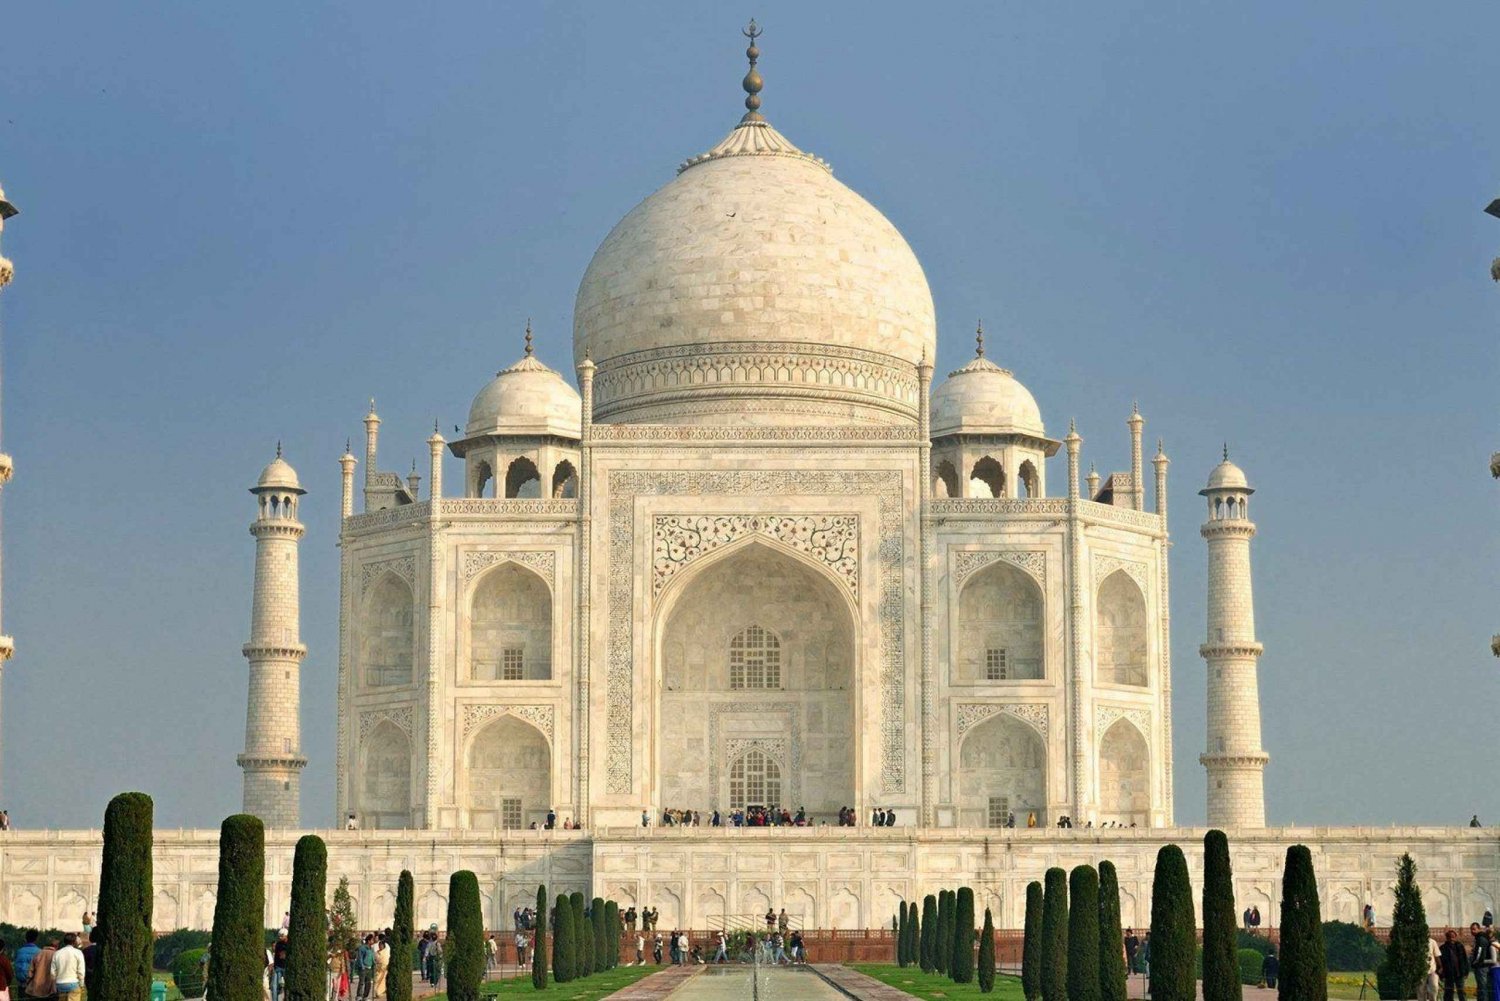 From Jaipur: Taj Mahal & Agra Tour with Lunch & Entry Fee